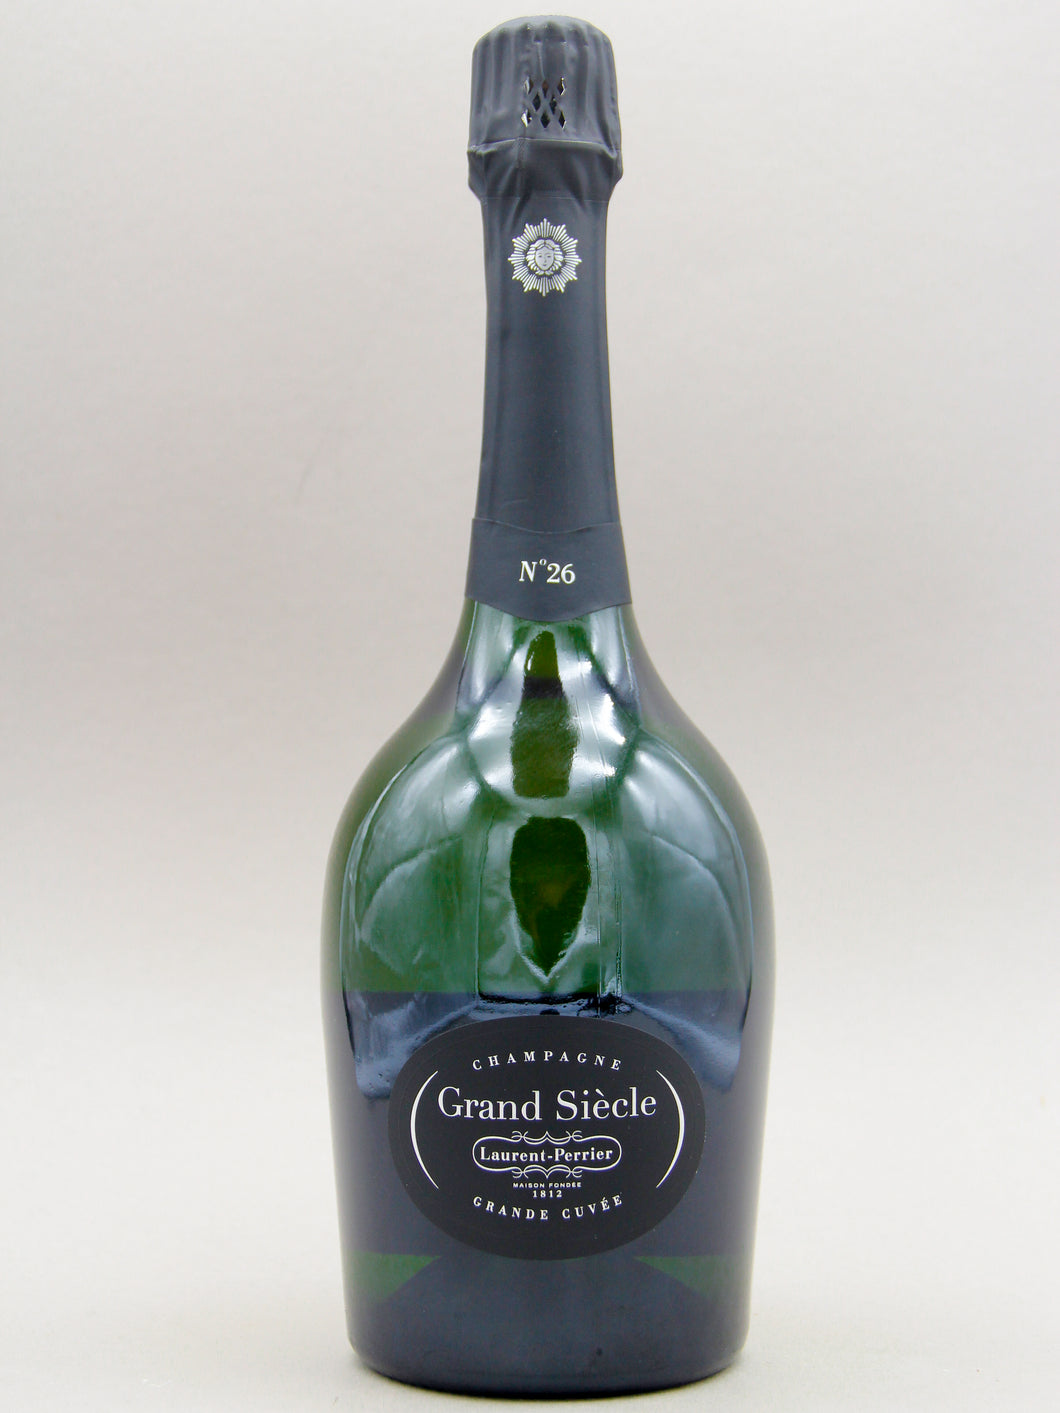 Laurent-Perrier, Grand Siecle No26, Champagne (12%, 75cl)